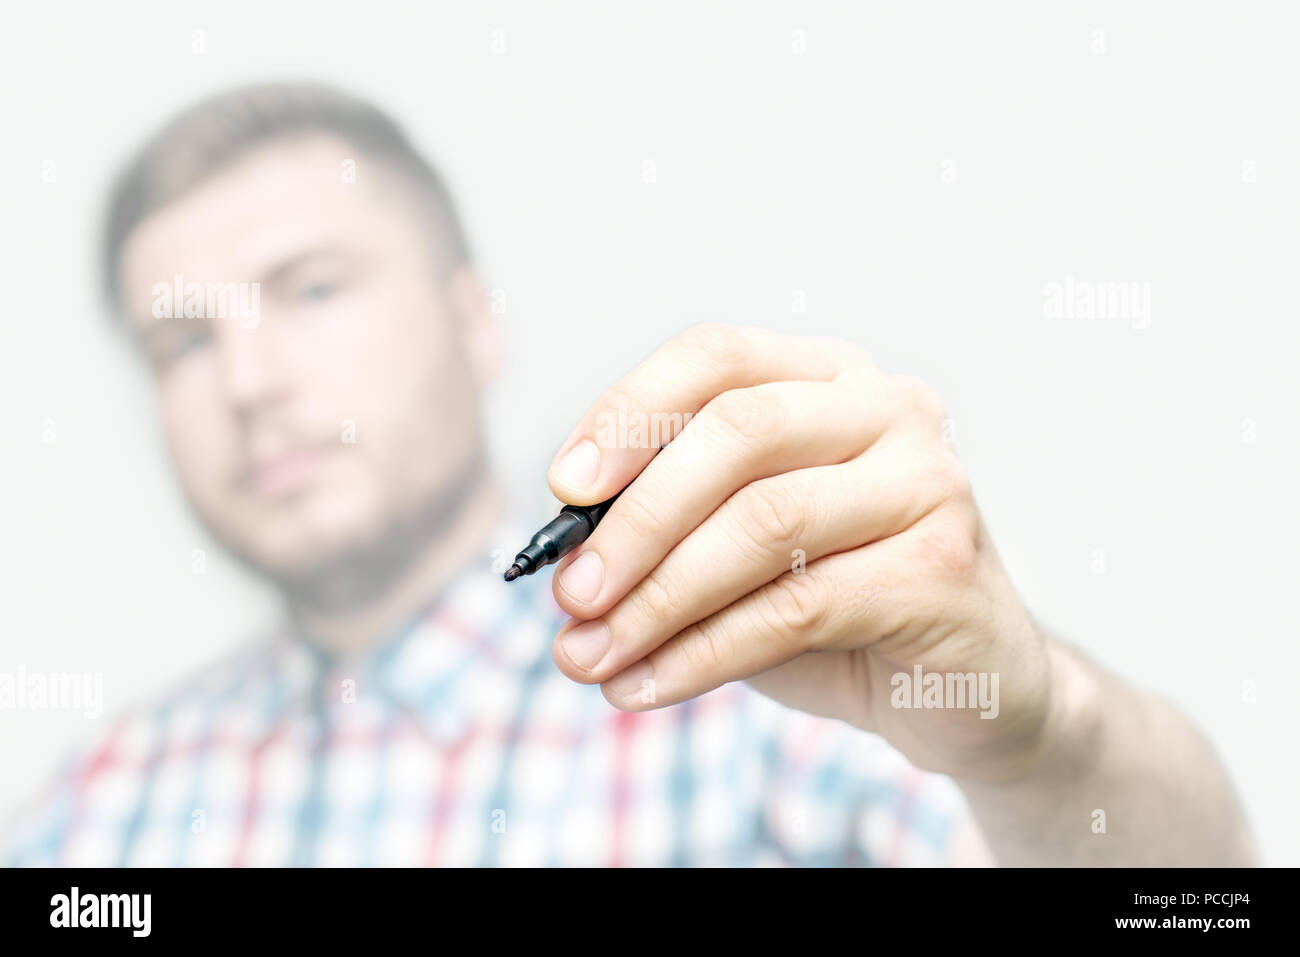 Template - young man draws or write a with marker on the glass wall or screen Stock Photo